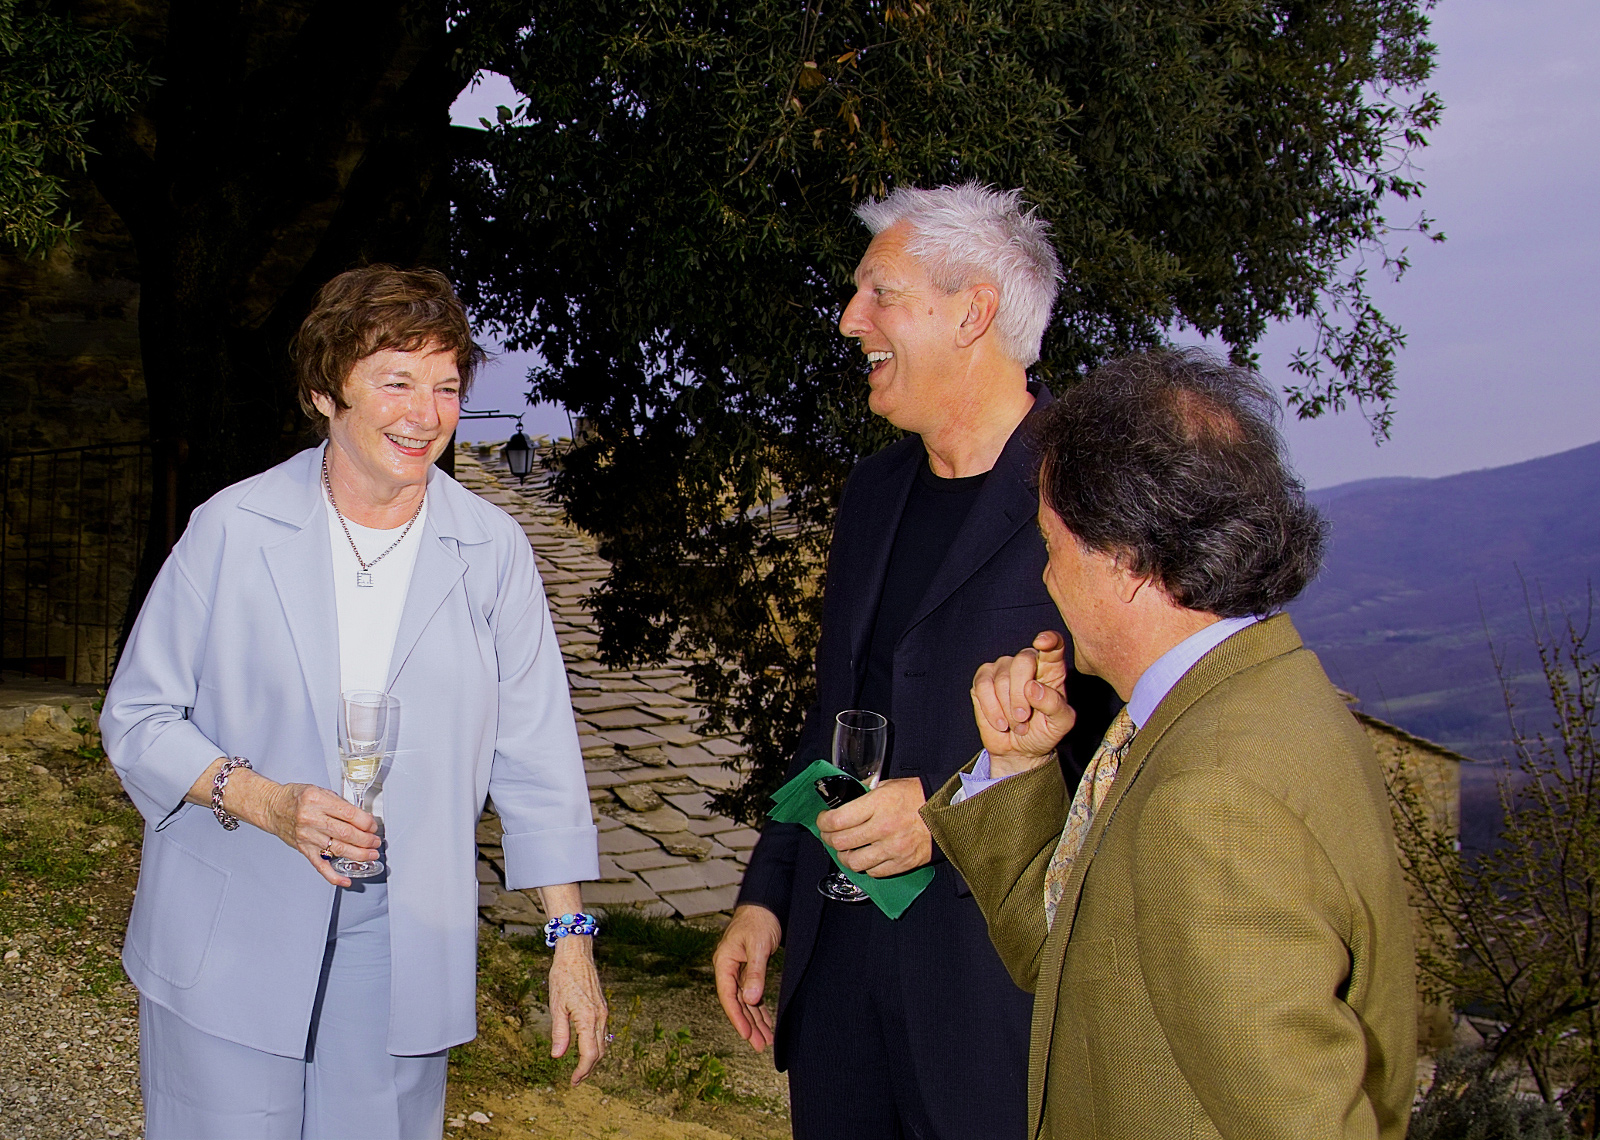 The photo shows Frances Mayes, Edward Kleinschmidt Mayes and Fulvio Di Rosa laughing together at the
                  opening ceremony of Borgo di Vagli